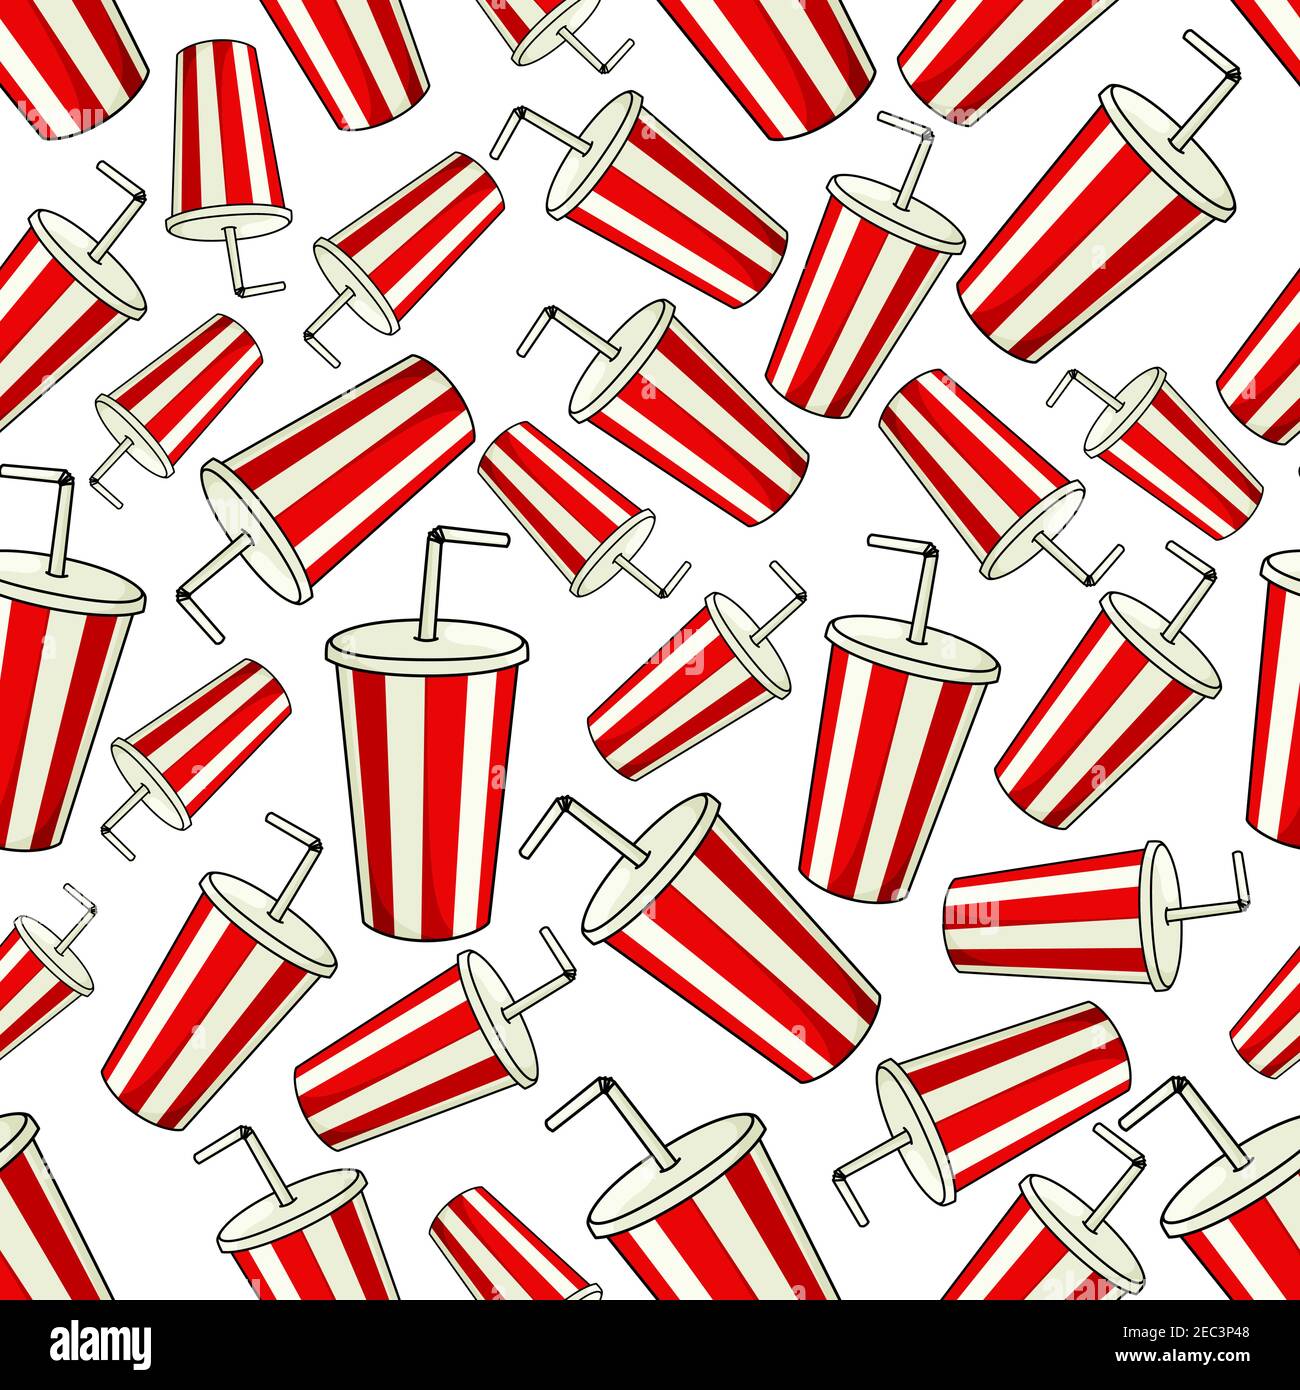 Traditional striped paper cups of sweet soda with drinking straws seamless pattern background with disposable cups of fast food soft drink with red an Stock Vector